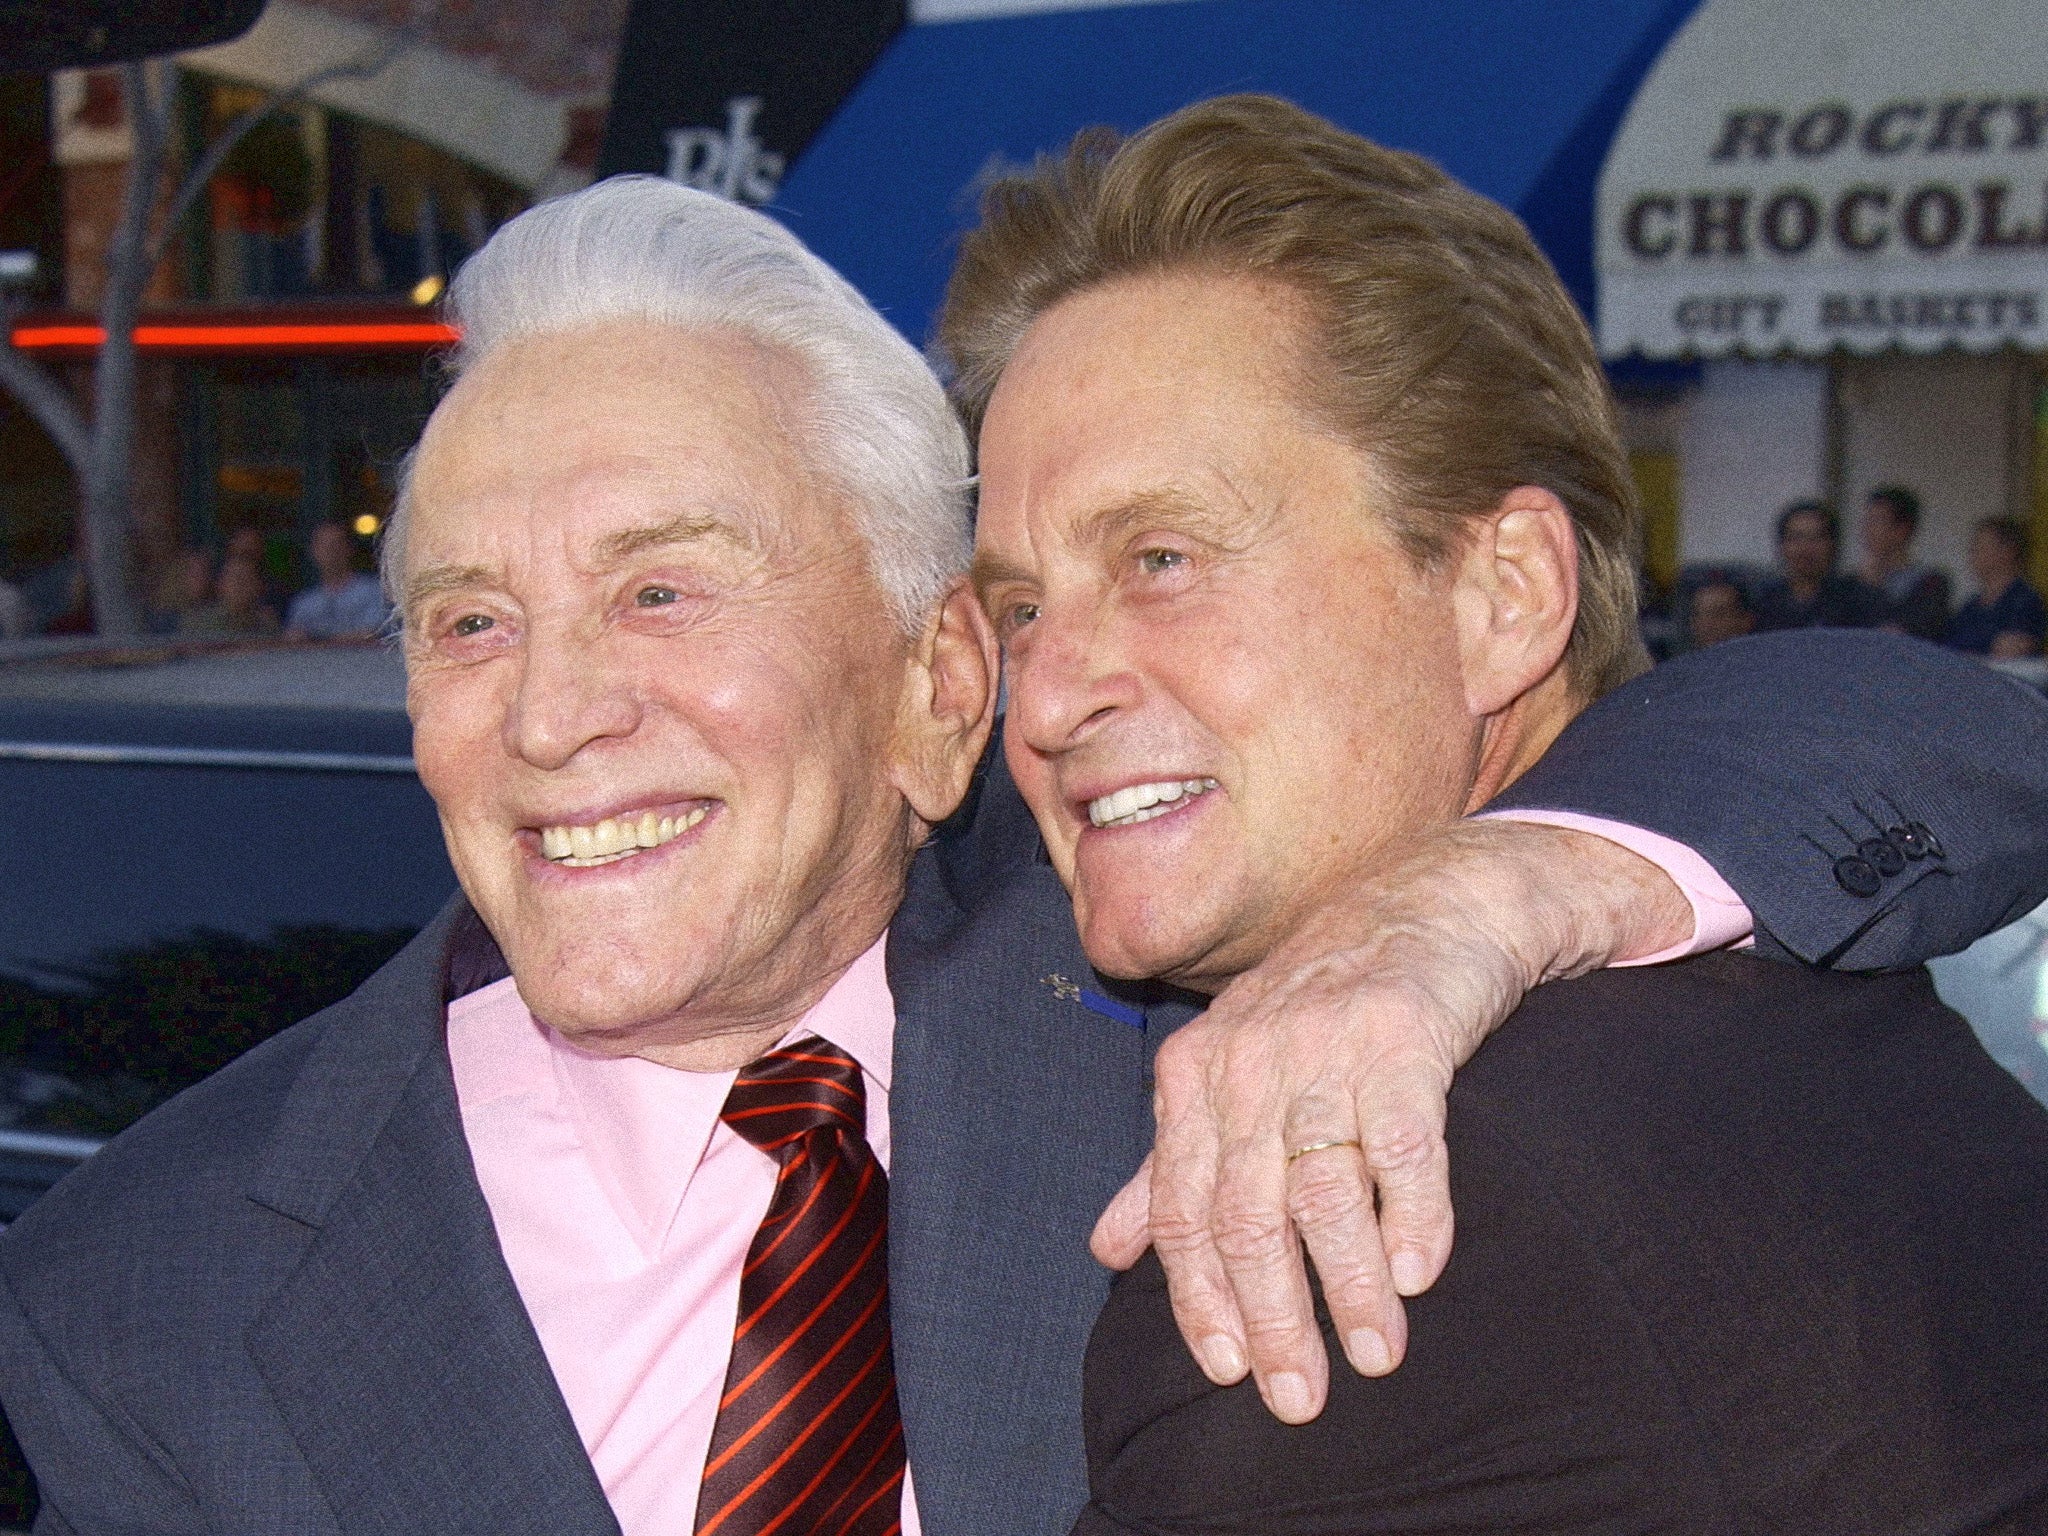 Kirk Douglas with his son Michael at a film premiere in 2003